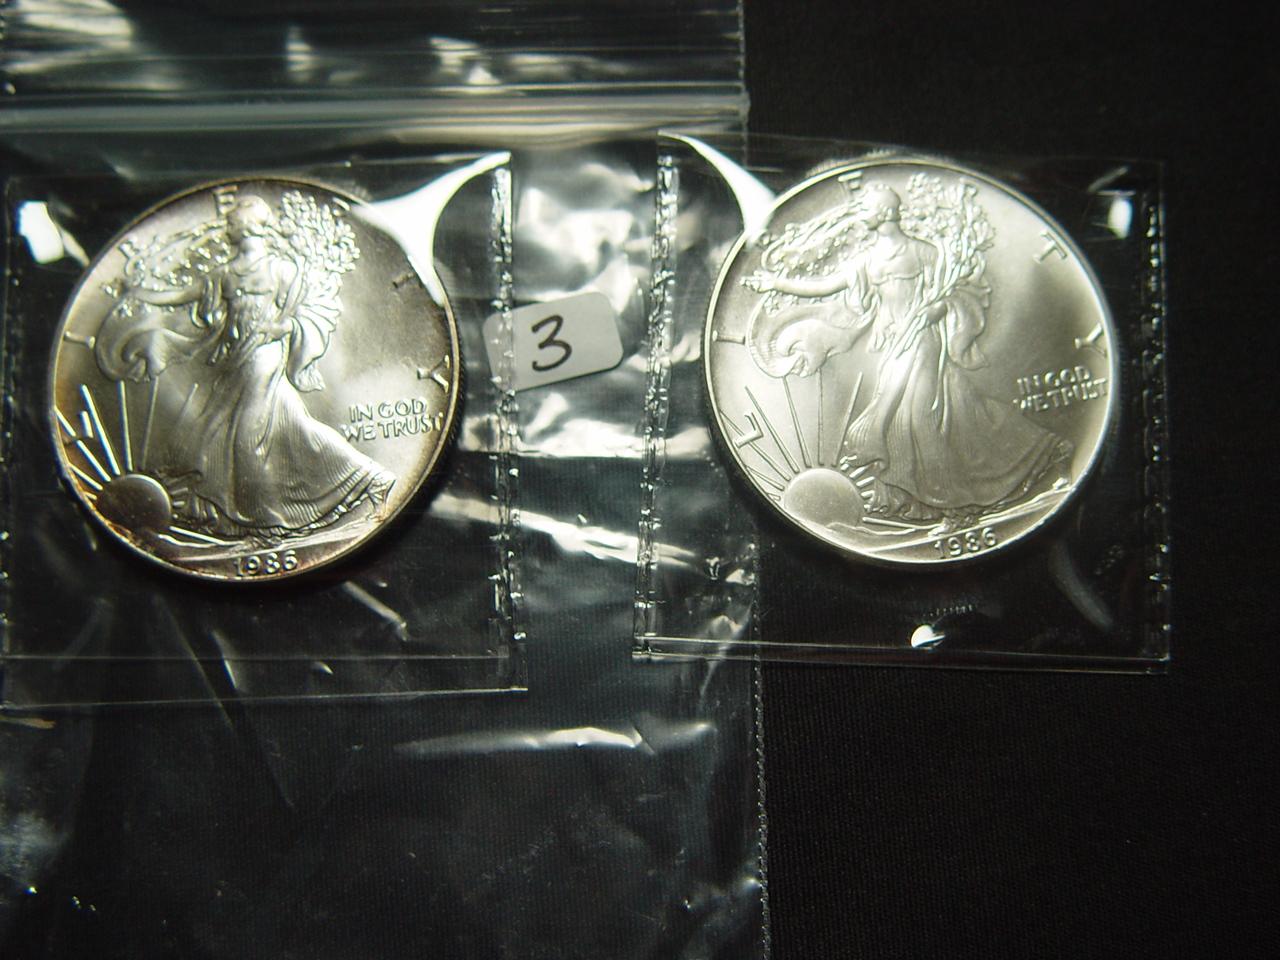 Pair of 1986 BU Silver Eagles   Better Date